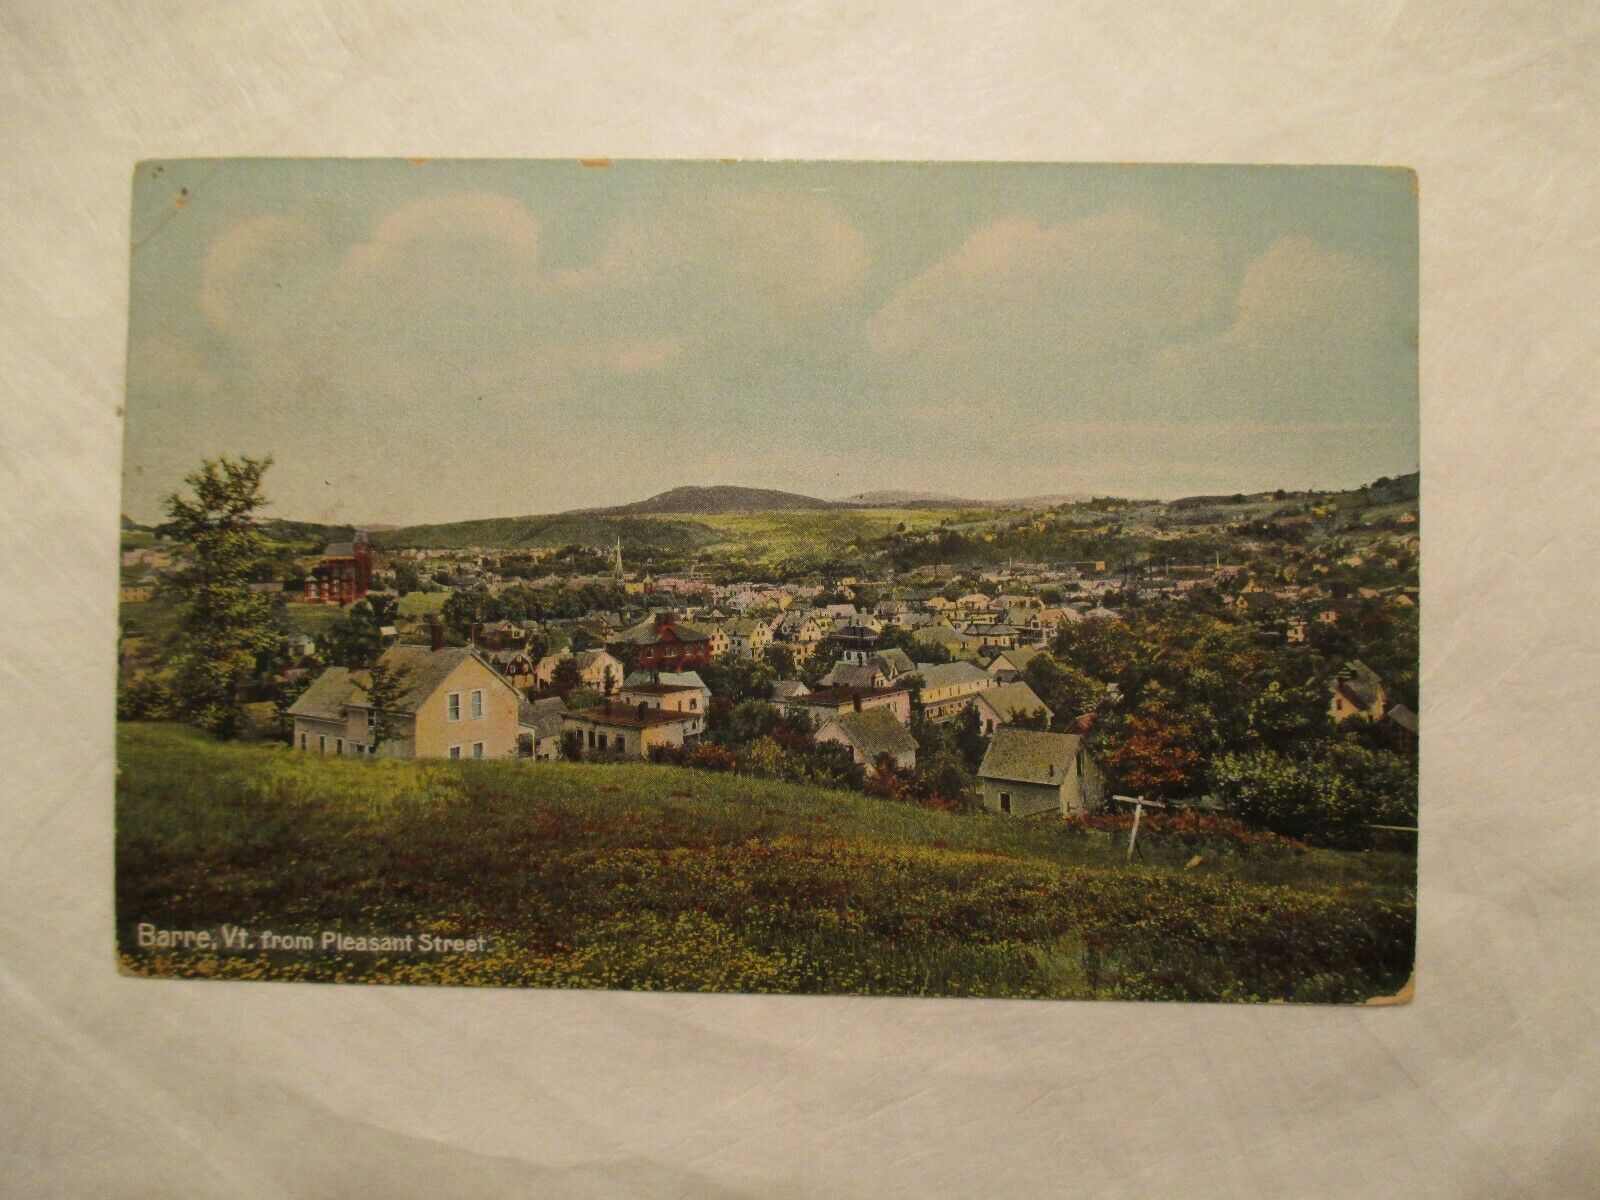 1912 from pleasant street Barre Vermont VT  Postcard 